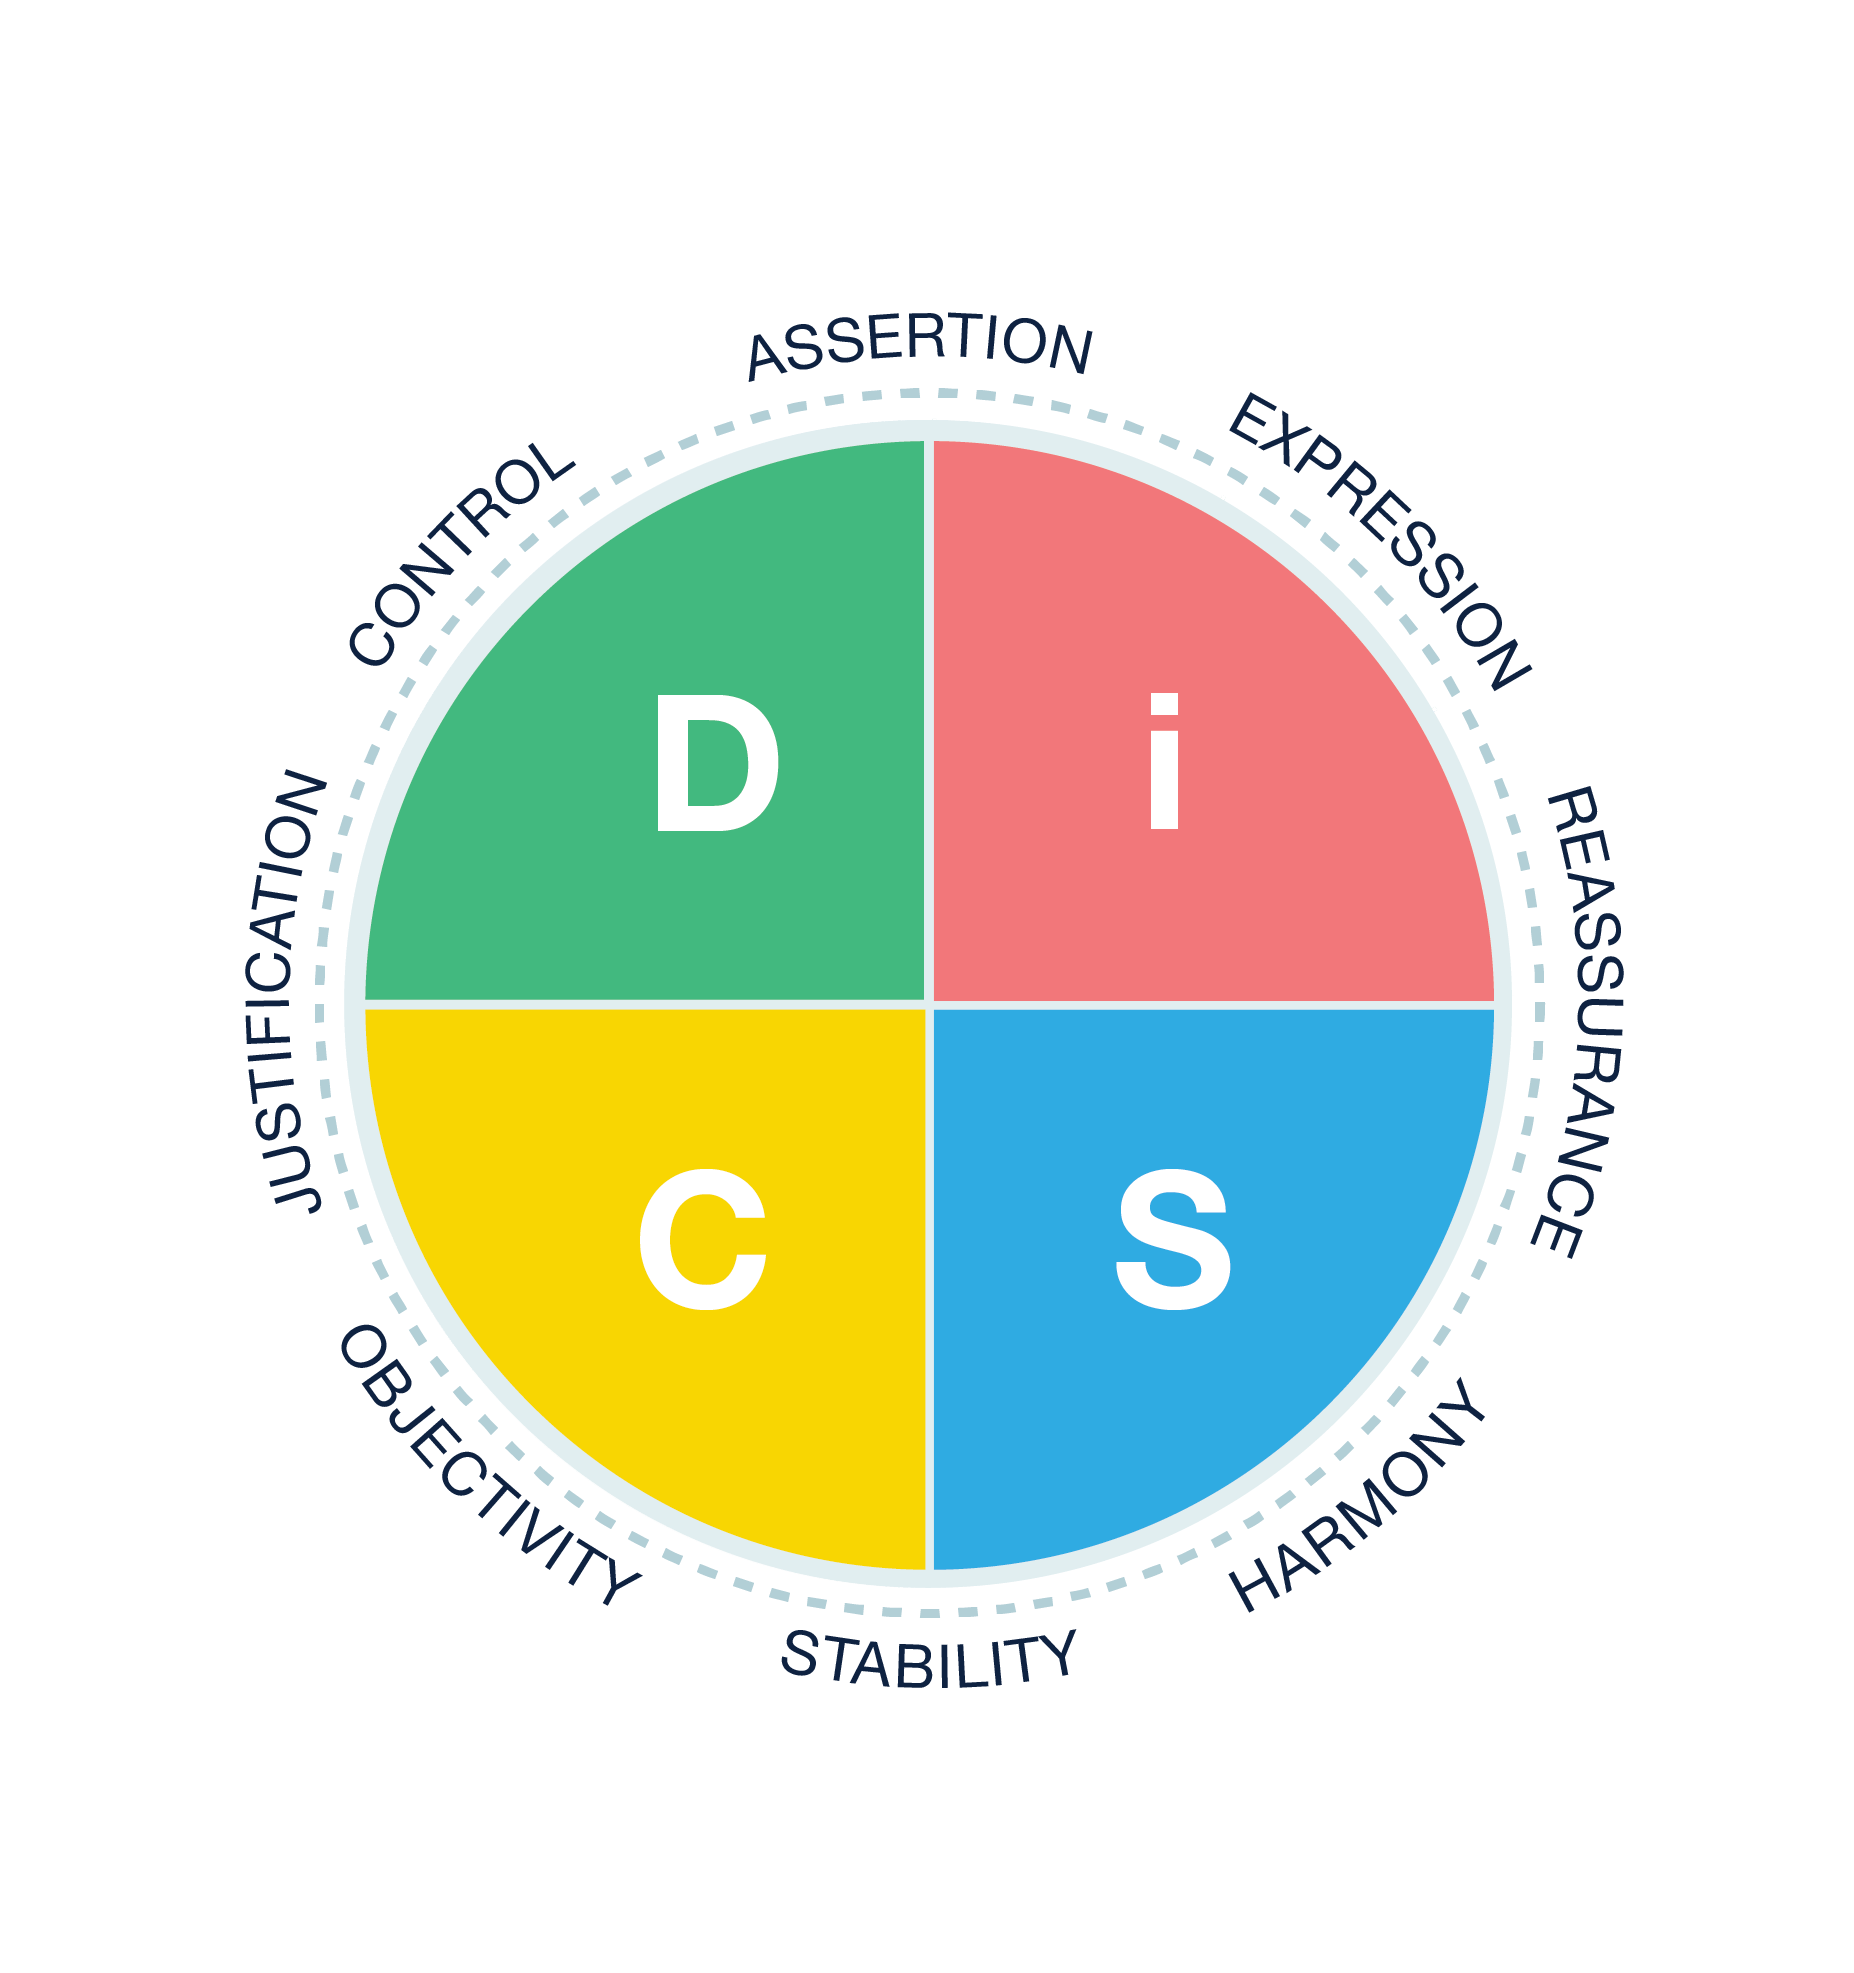 WHAT IS DISC?